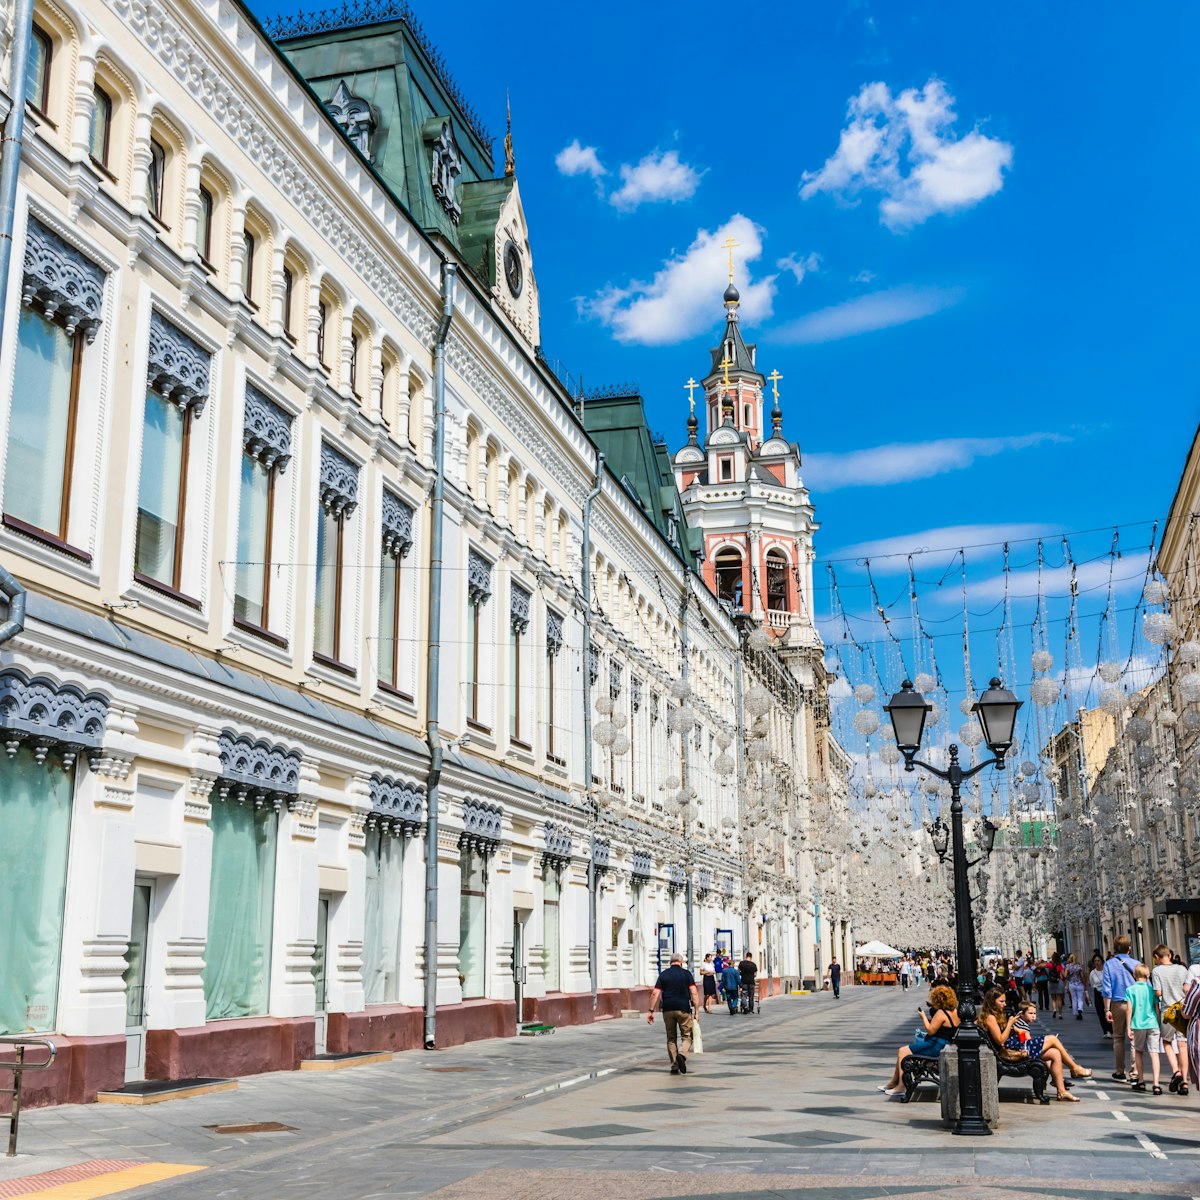 Nikolskaya Street, a pedestrian street in the Kitay-Gorod of Moscow, which connects Red Square and Lubyanka Square.